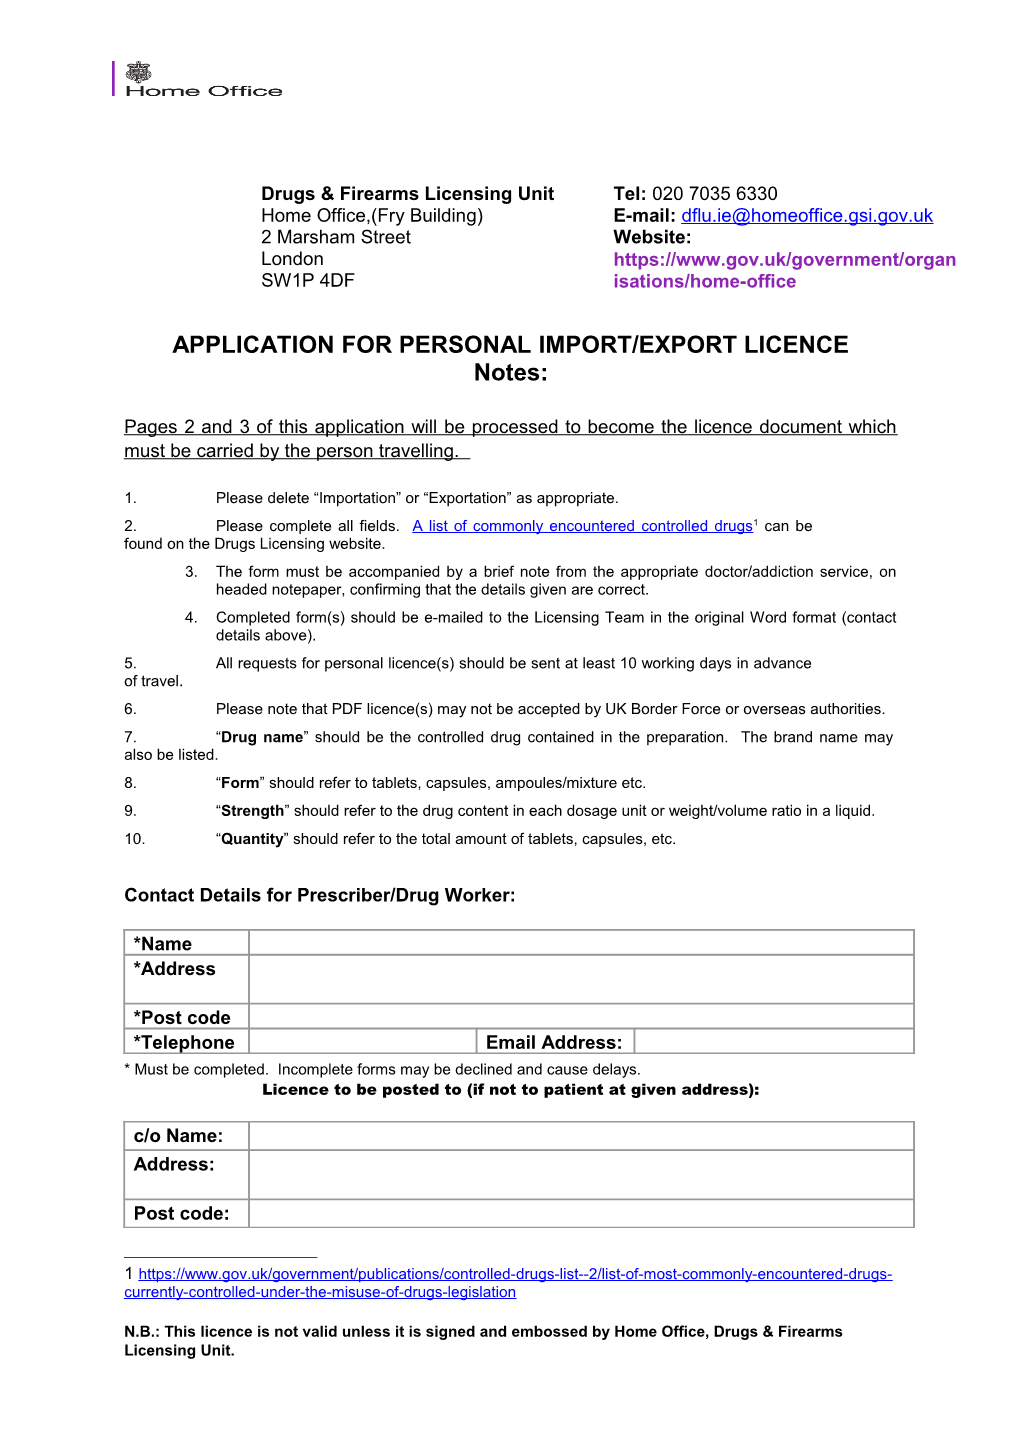 Application for Personal Import/Export Licence